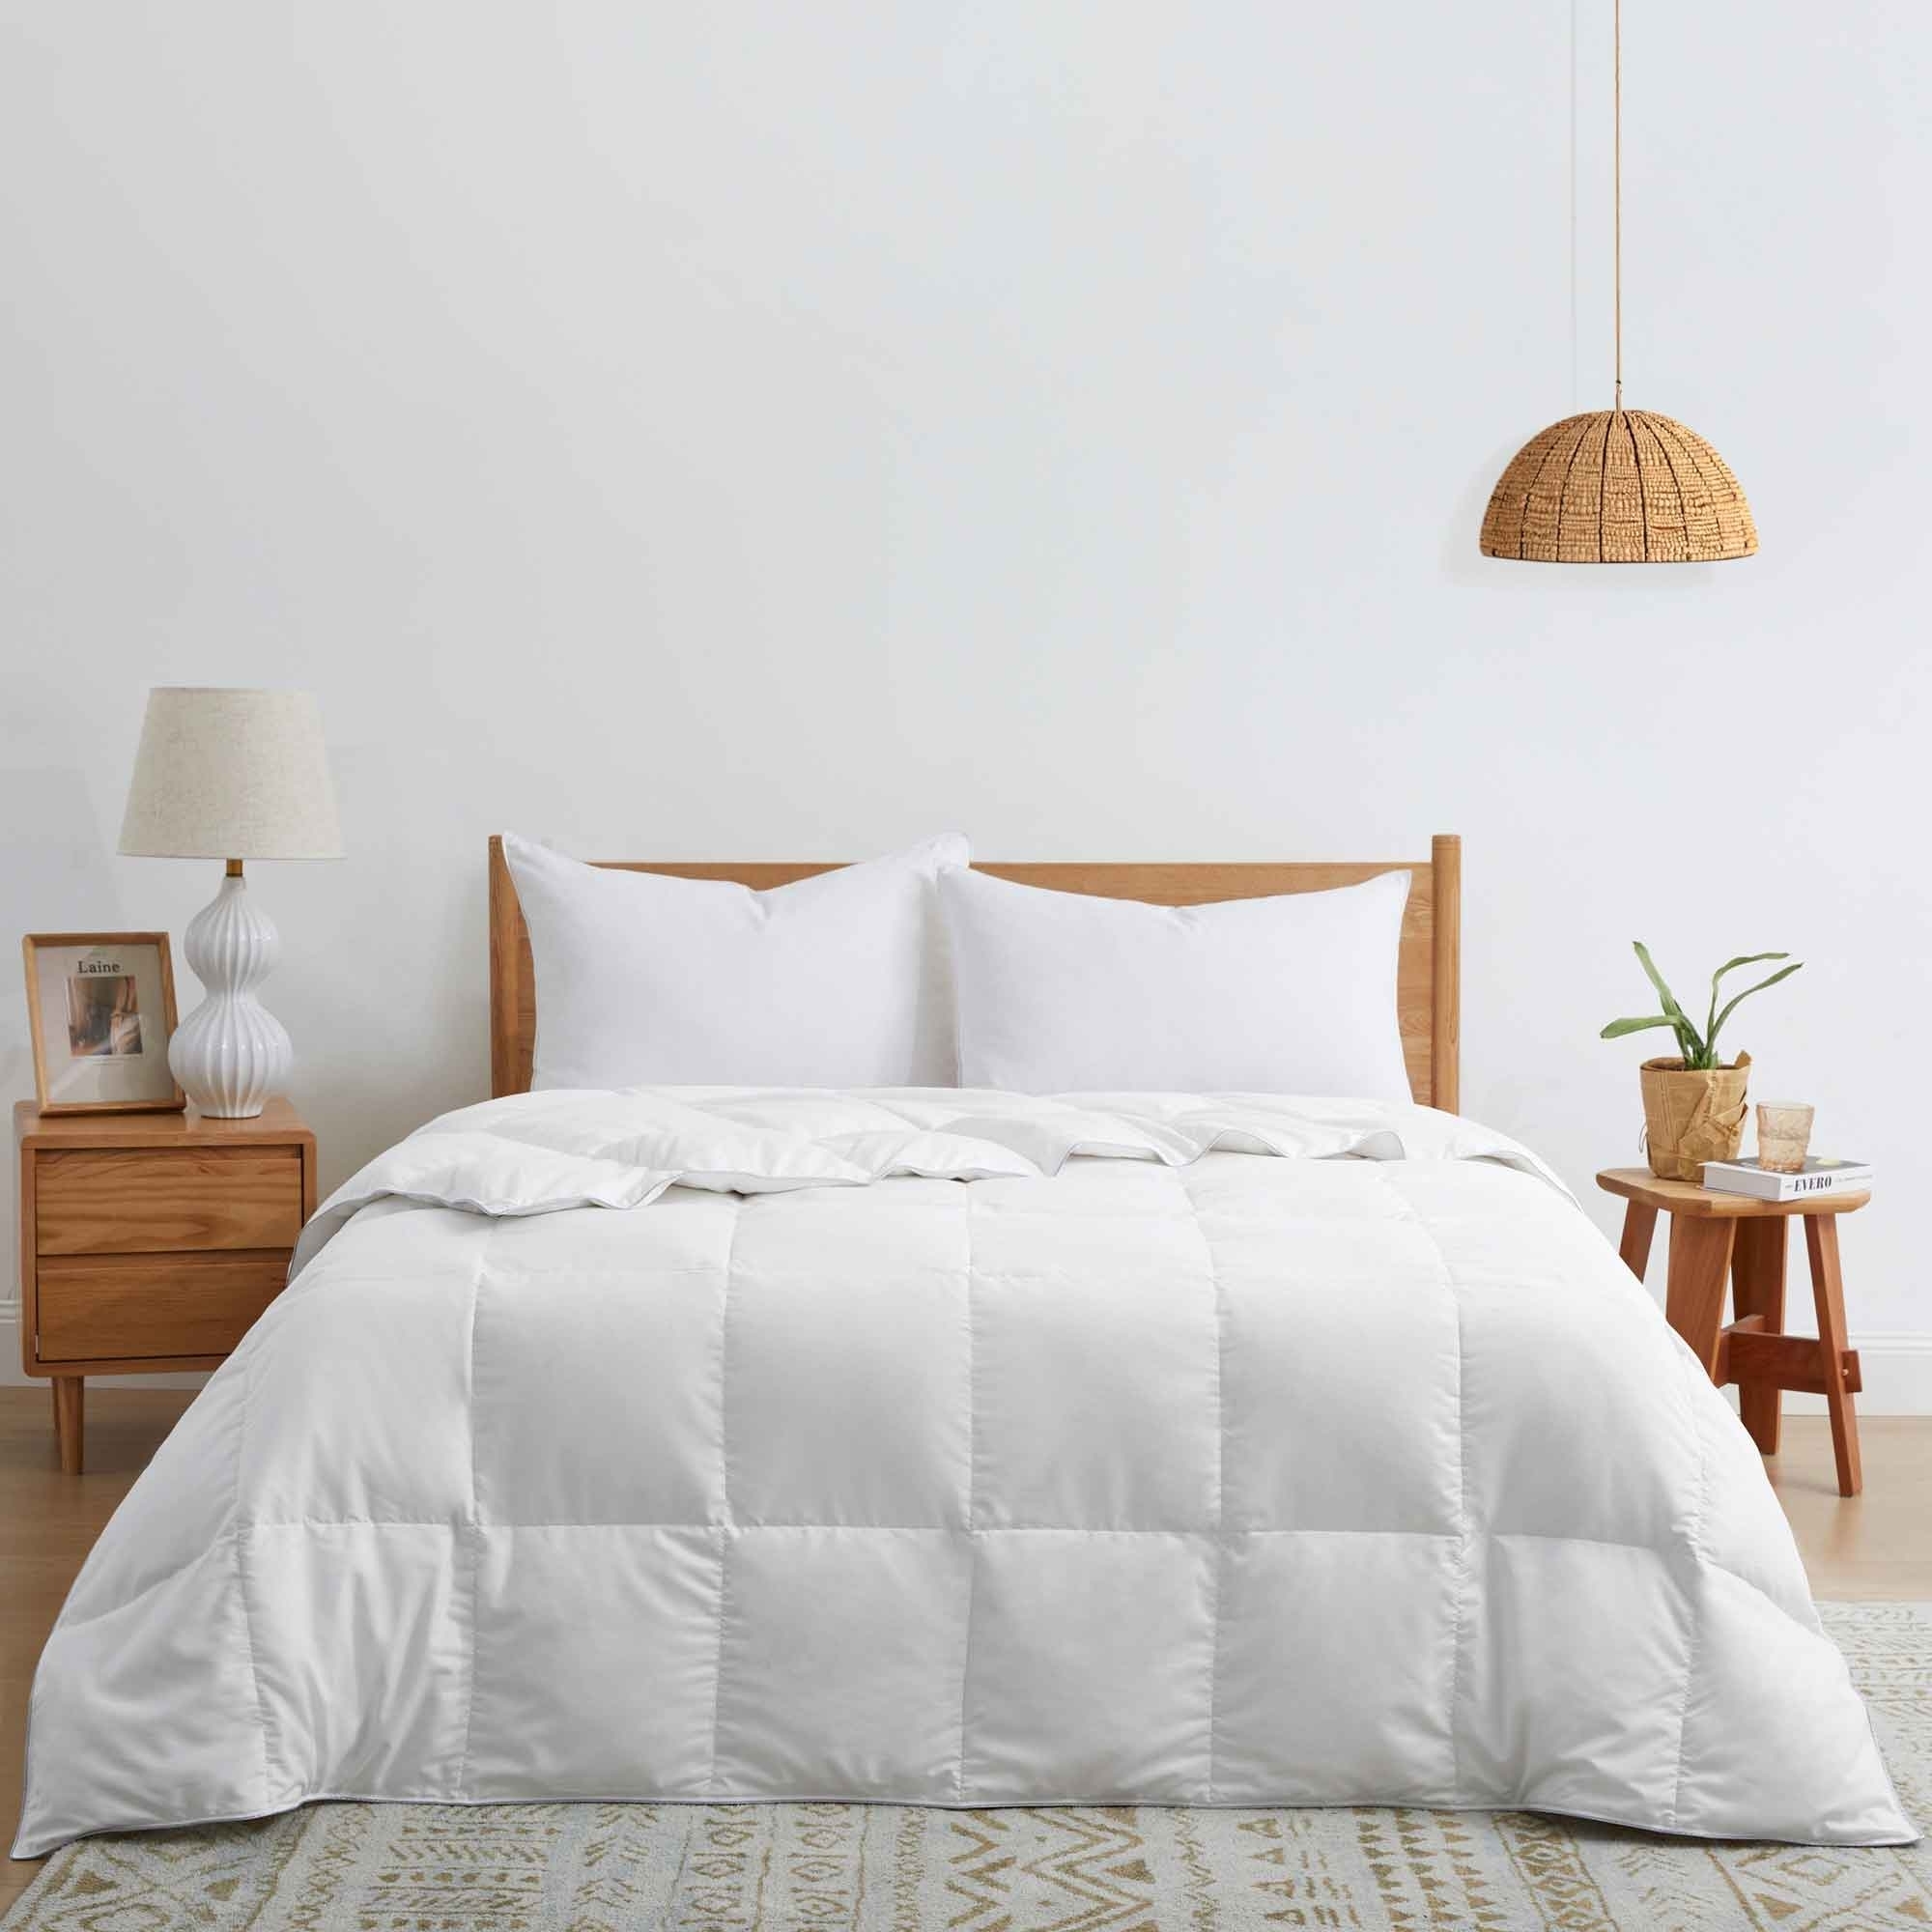 Lightweight Goose Feather And Down Comforter- Hotel Collection For Hot Sleepers - White, King